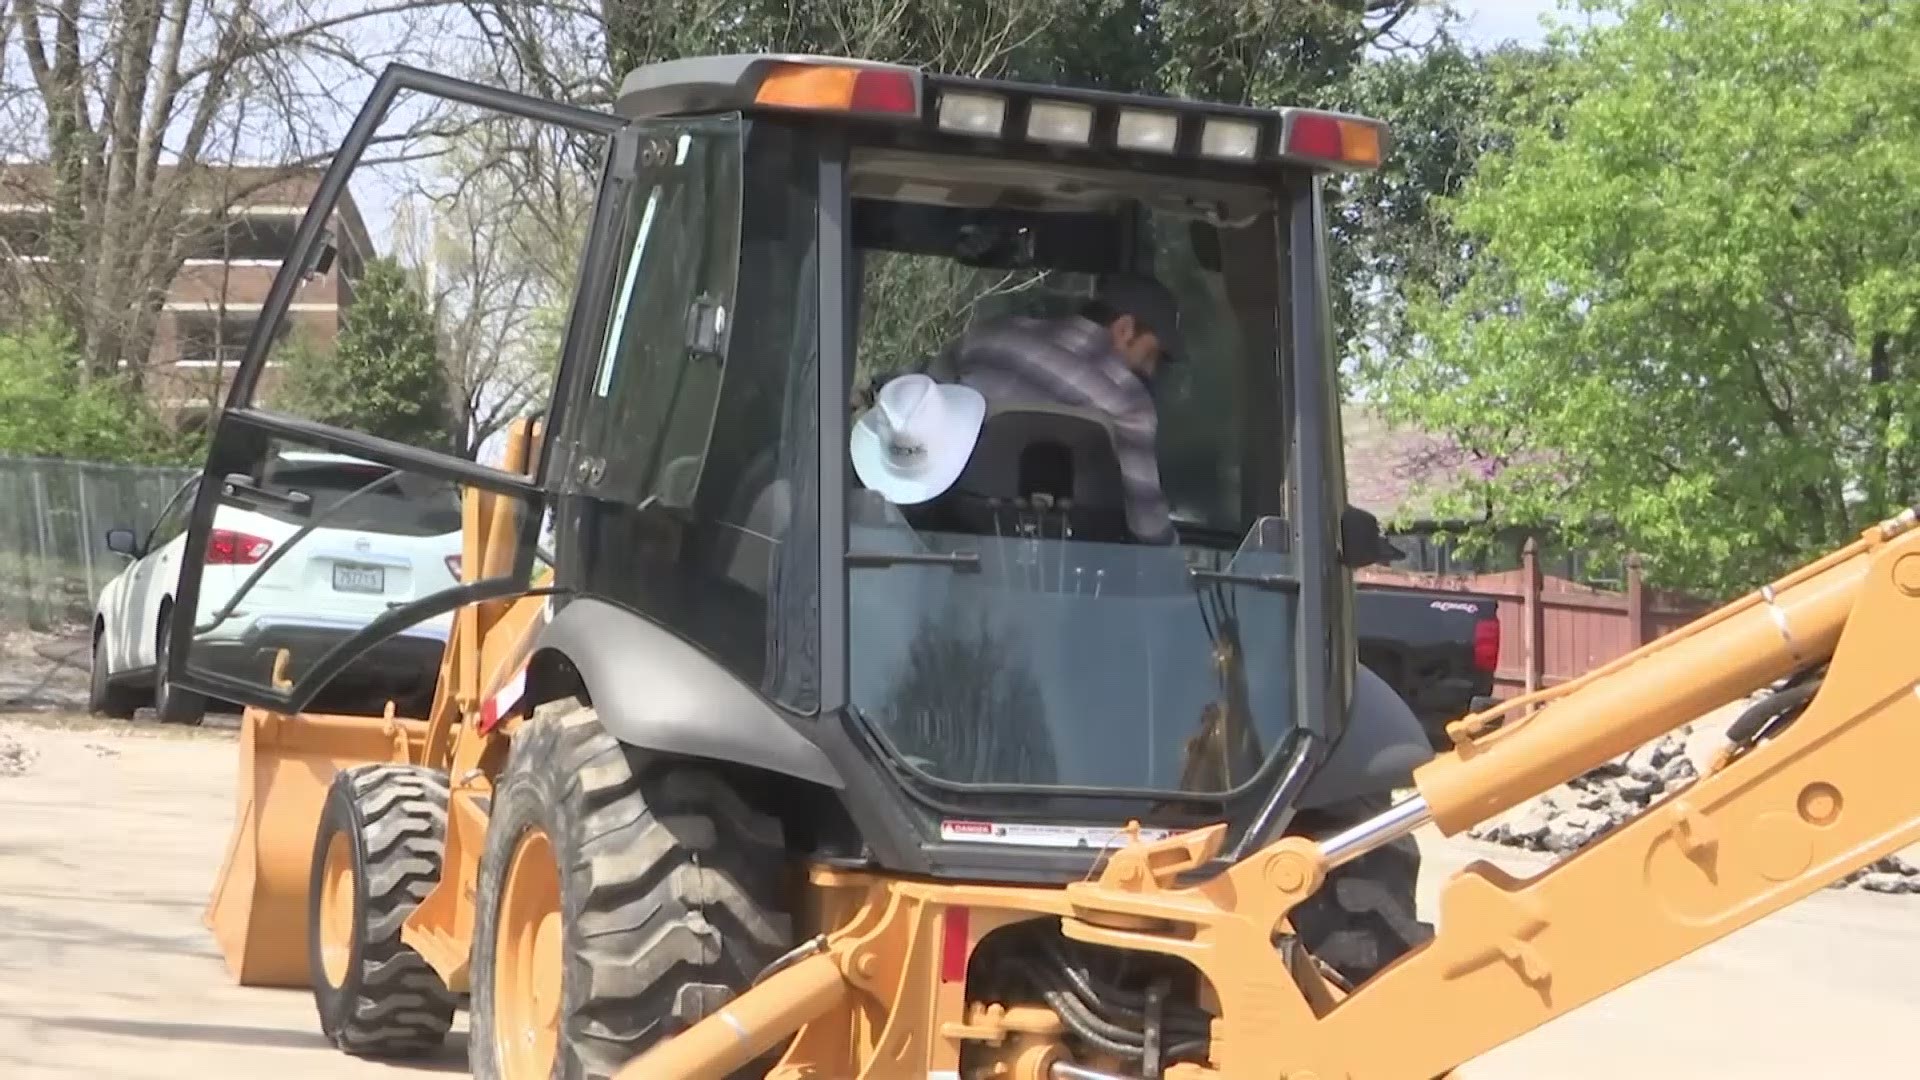 Country star Brad Paisley took the controls of a backhoe to dig up the first pile of dirt in the space that will become a free grocery store to support needy families in Nashville, Tennessee.